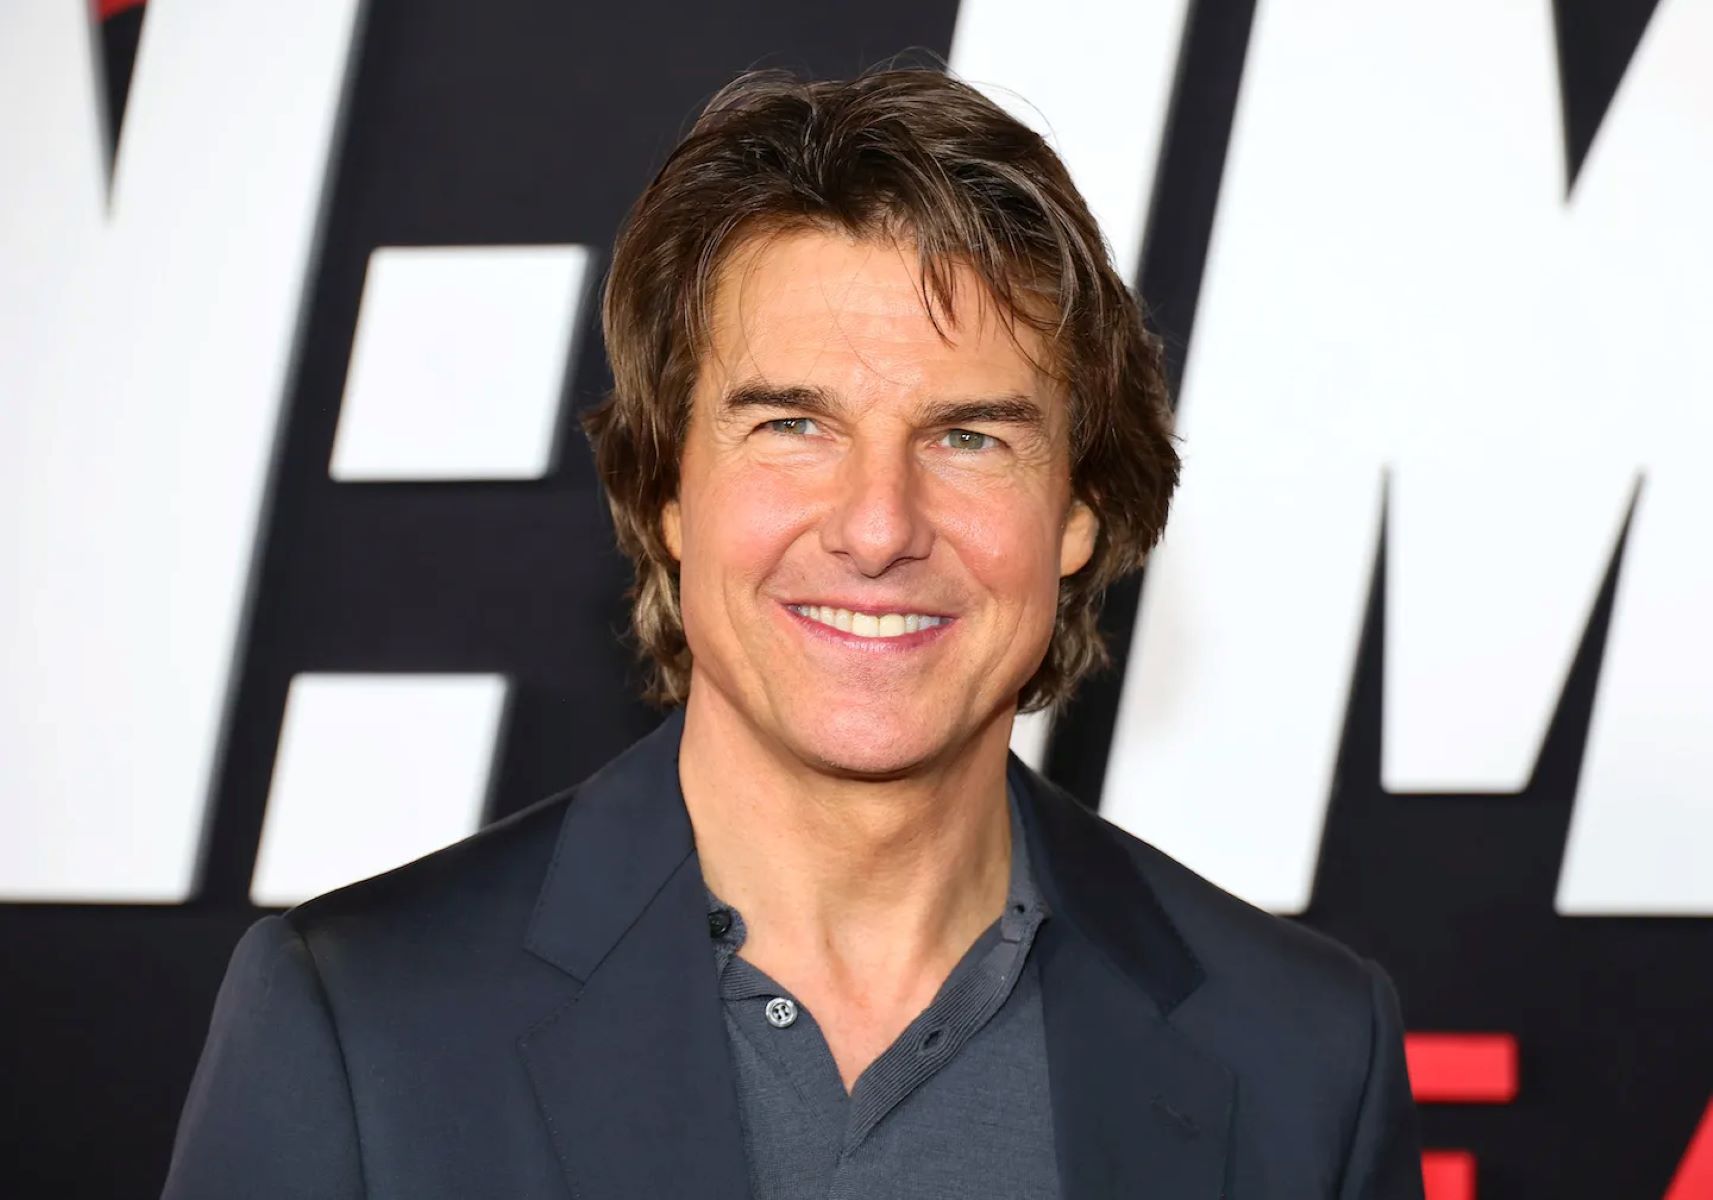 Tom Cruise's Insanity Exposed: Shocking Actions And Scientology Involvement